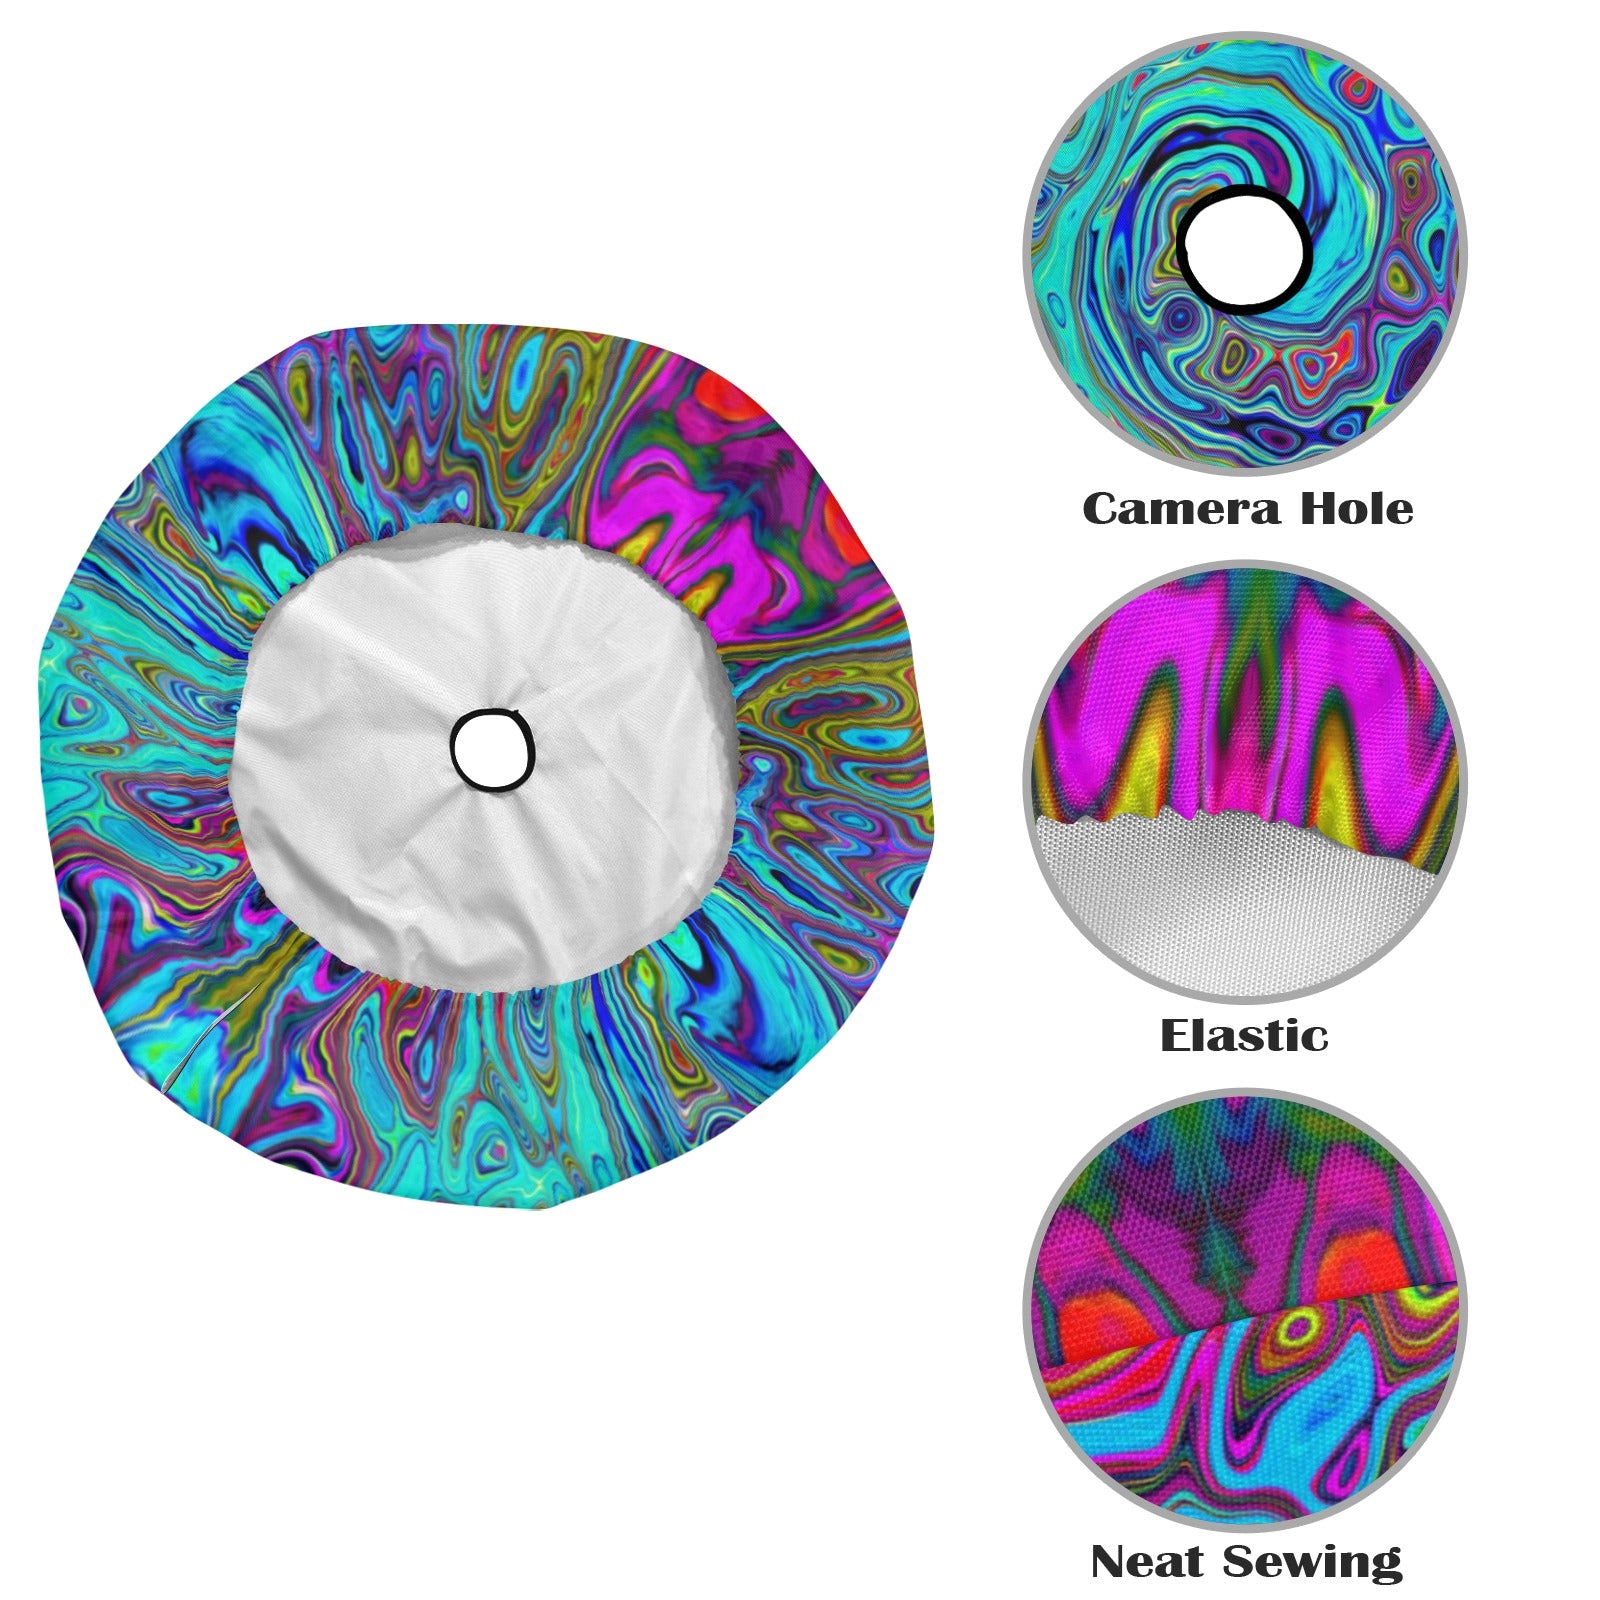 Spare Tire Cover with Backup Camera Hole - Trippy Sky Blue Abstract Retro Liquid Swirl - Small